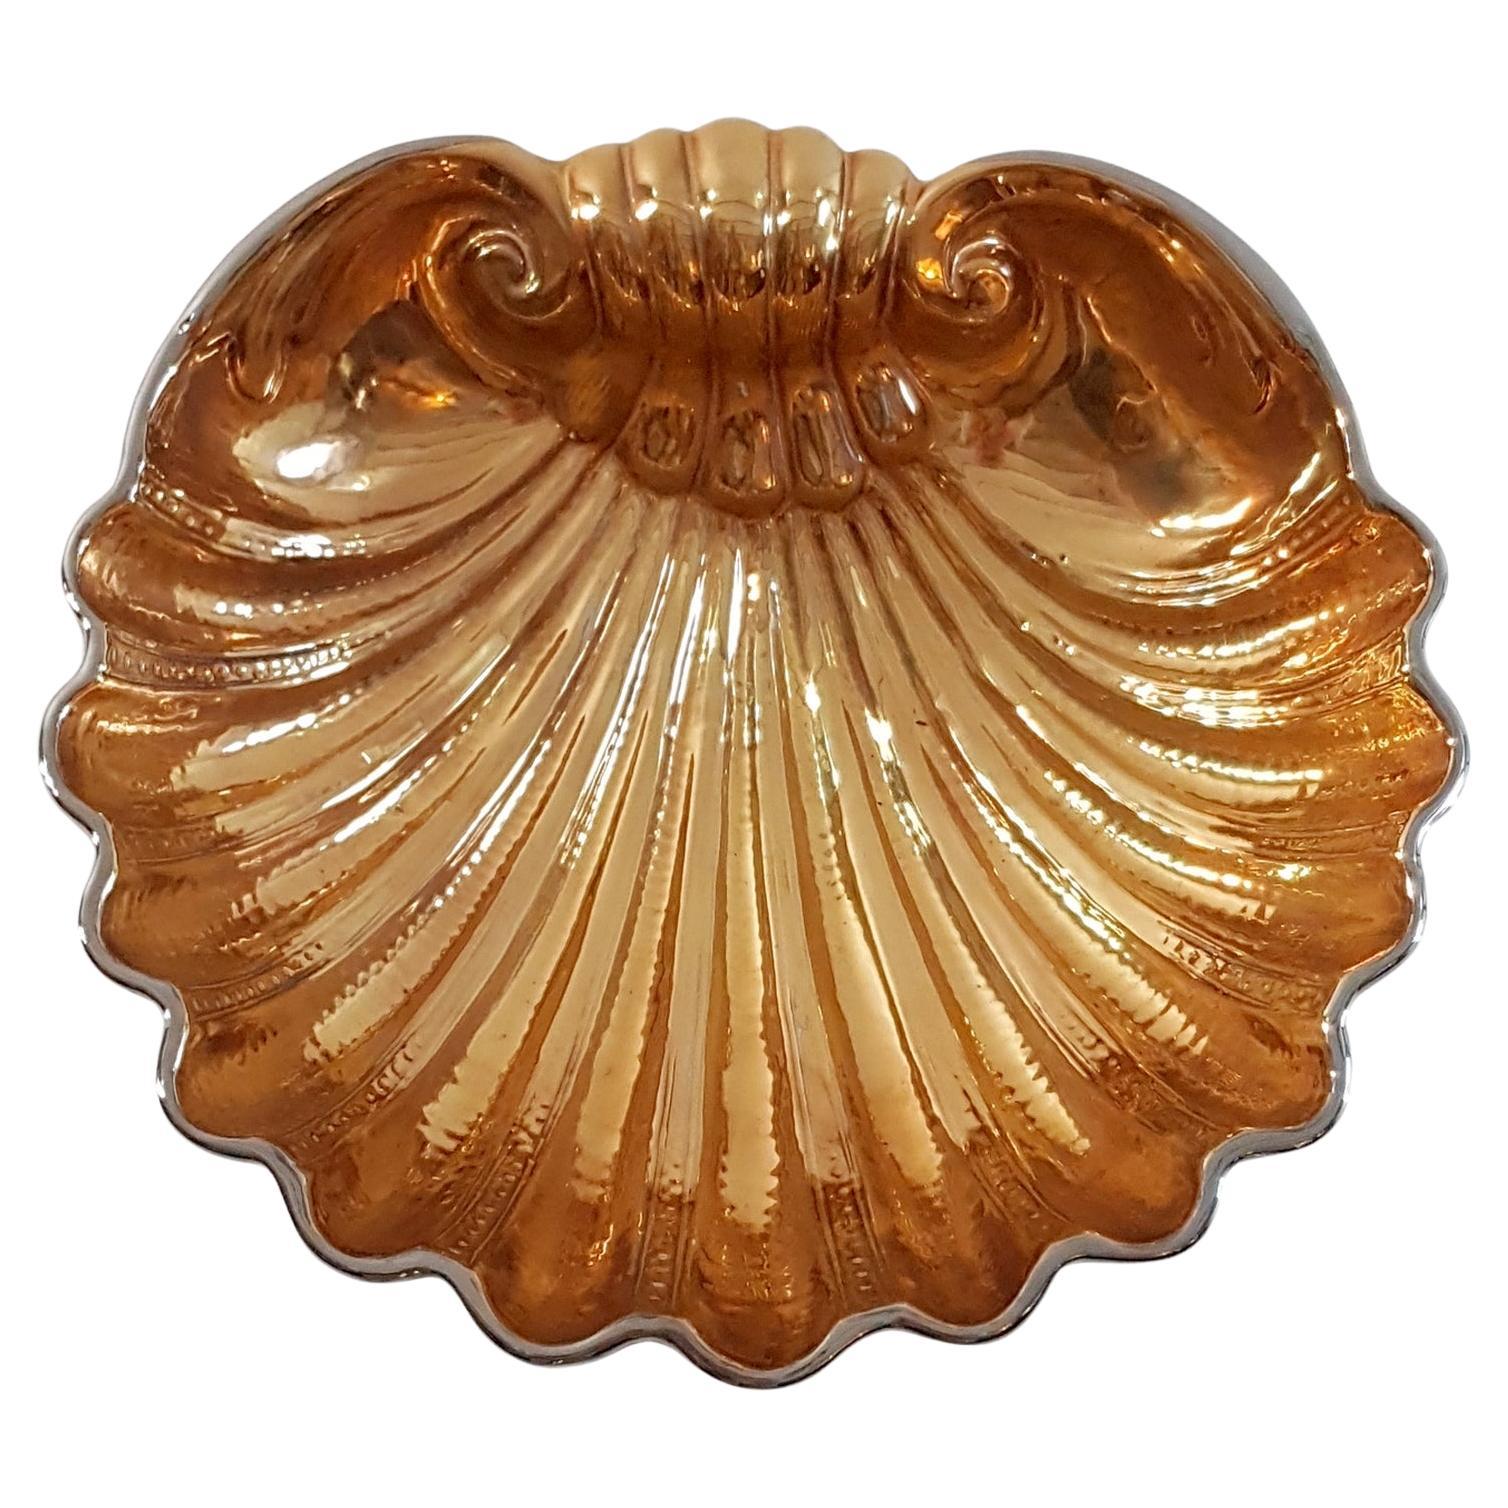 A large San Marco ceramic gold and silver shell bowl. Gold glazed inside with a contrasting chrome outside shell. Great for decorative purposes or as a fruit bowl. No fading, chipping or cracks.